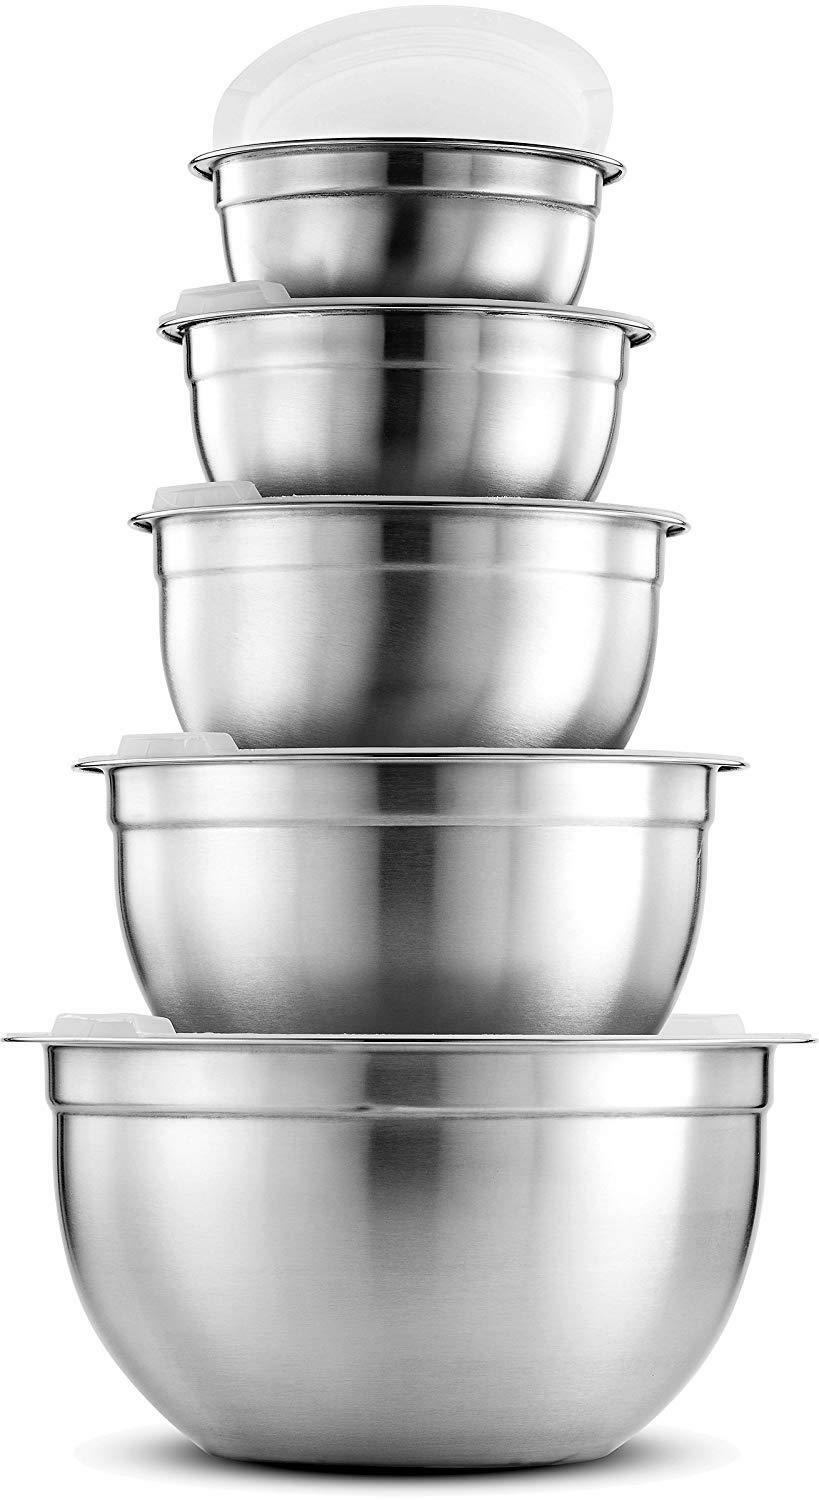 Premium Stainless Steel Mixing Bowls With Airtight Lids Various Sizes (5 Piece)